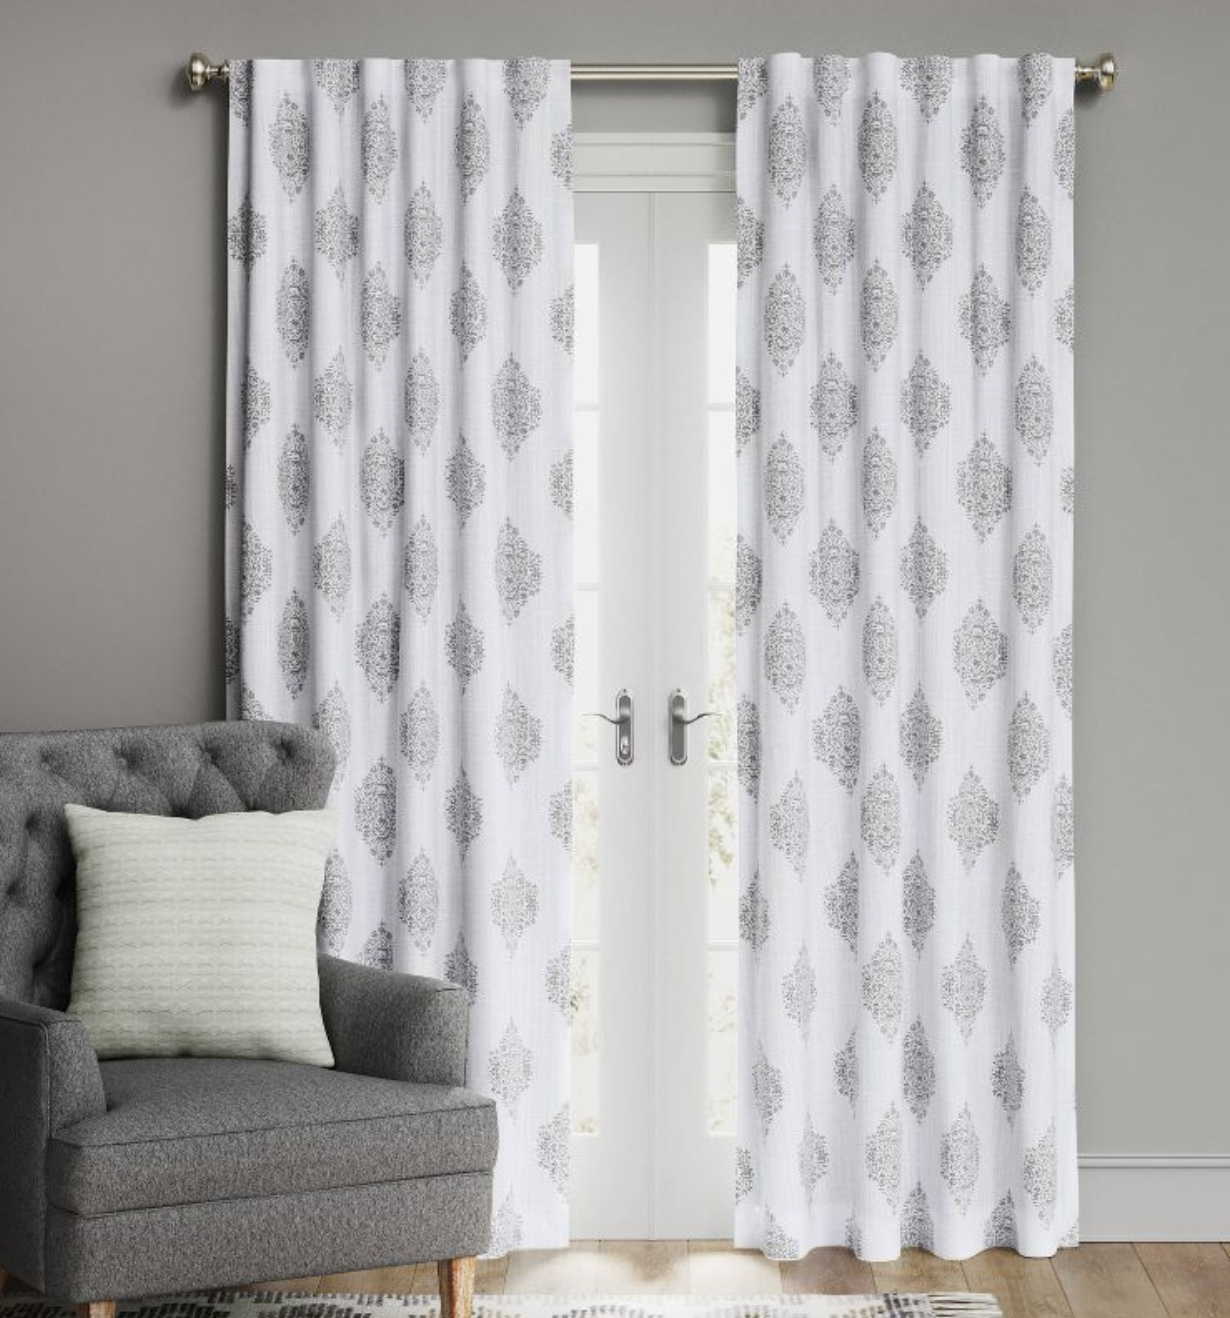 the curtains in white and gray